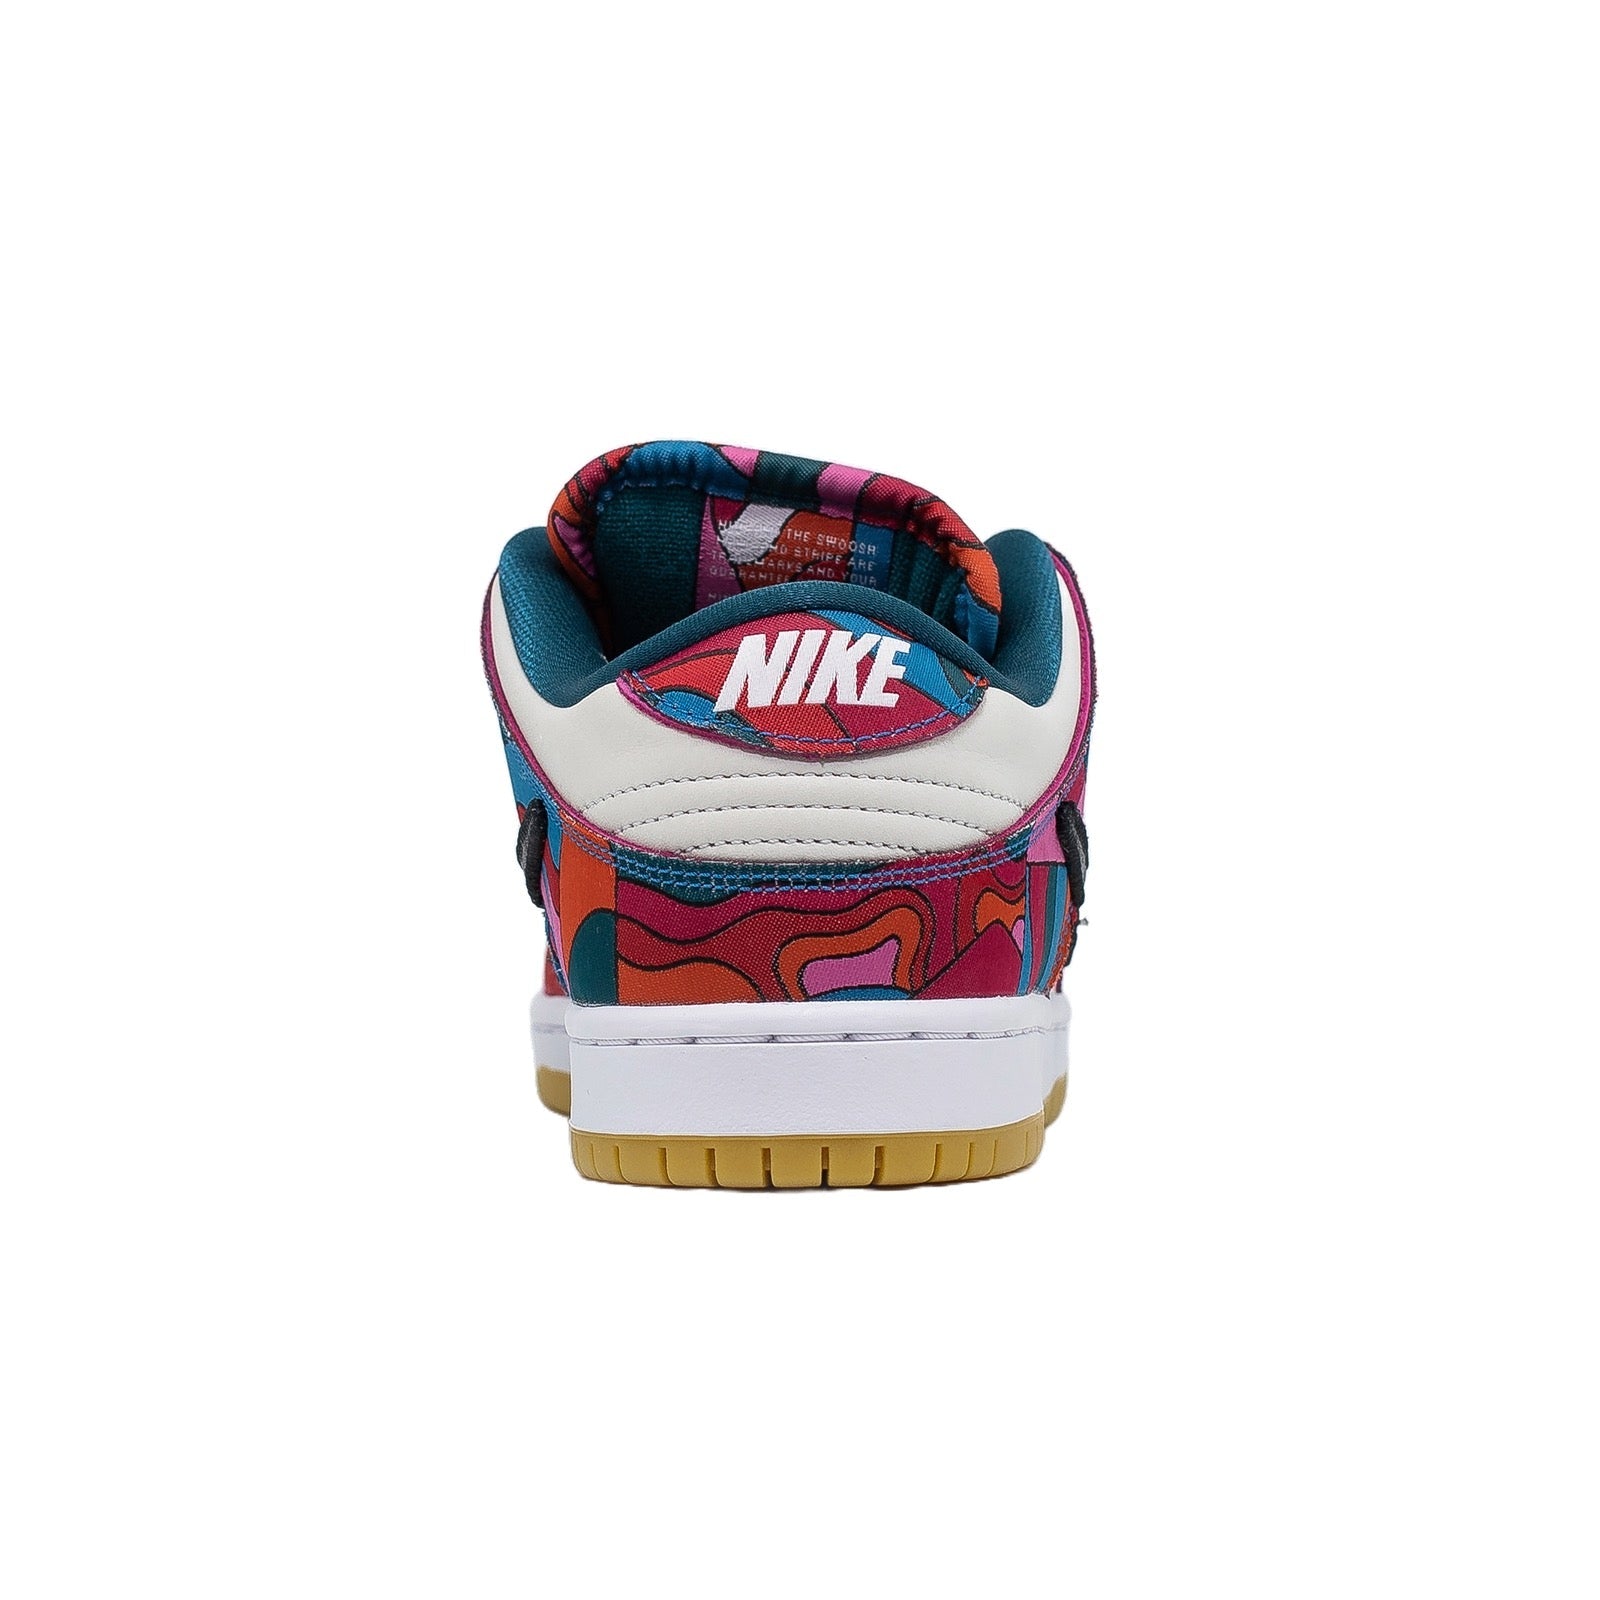 Nike SB Dunk Low, Pro Parra Abstract Art (2021)